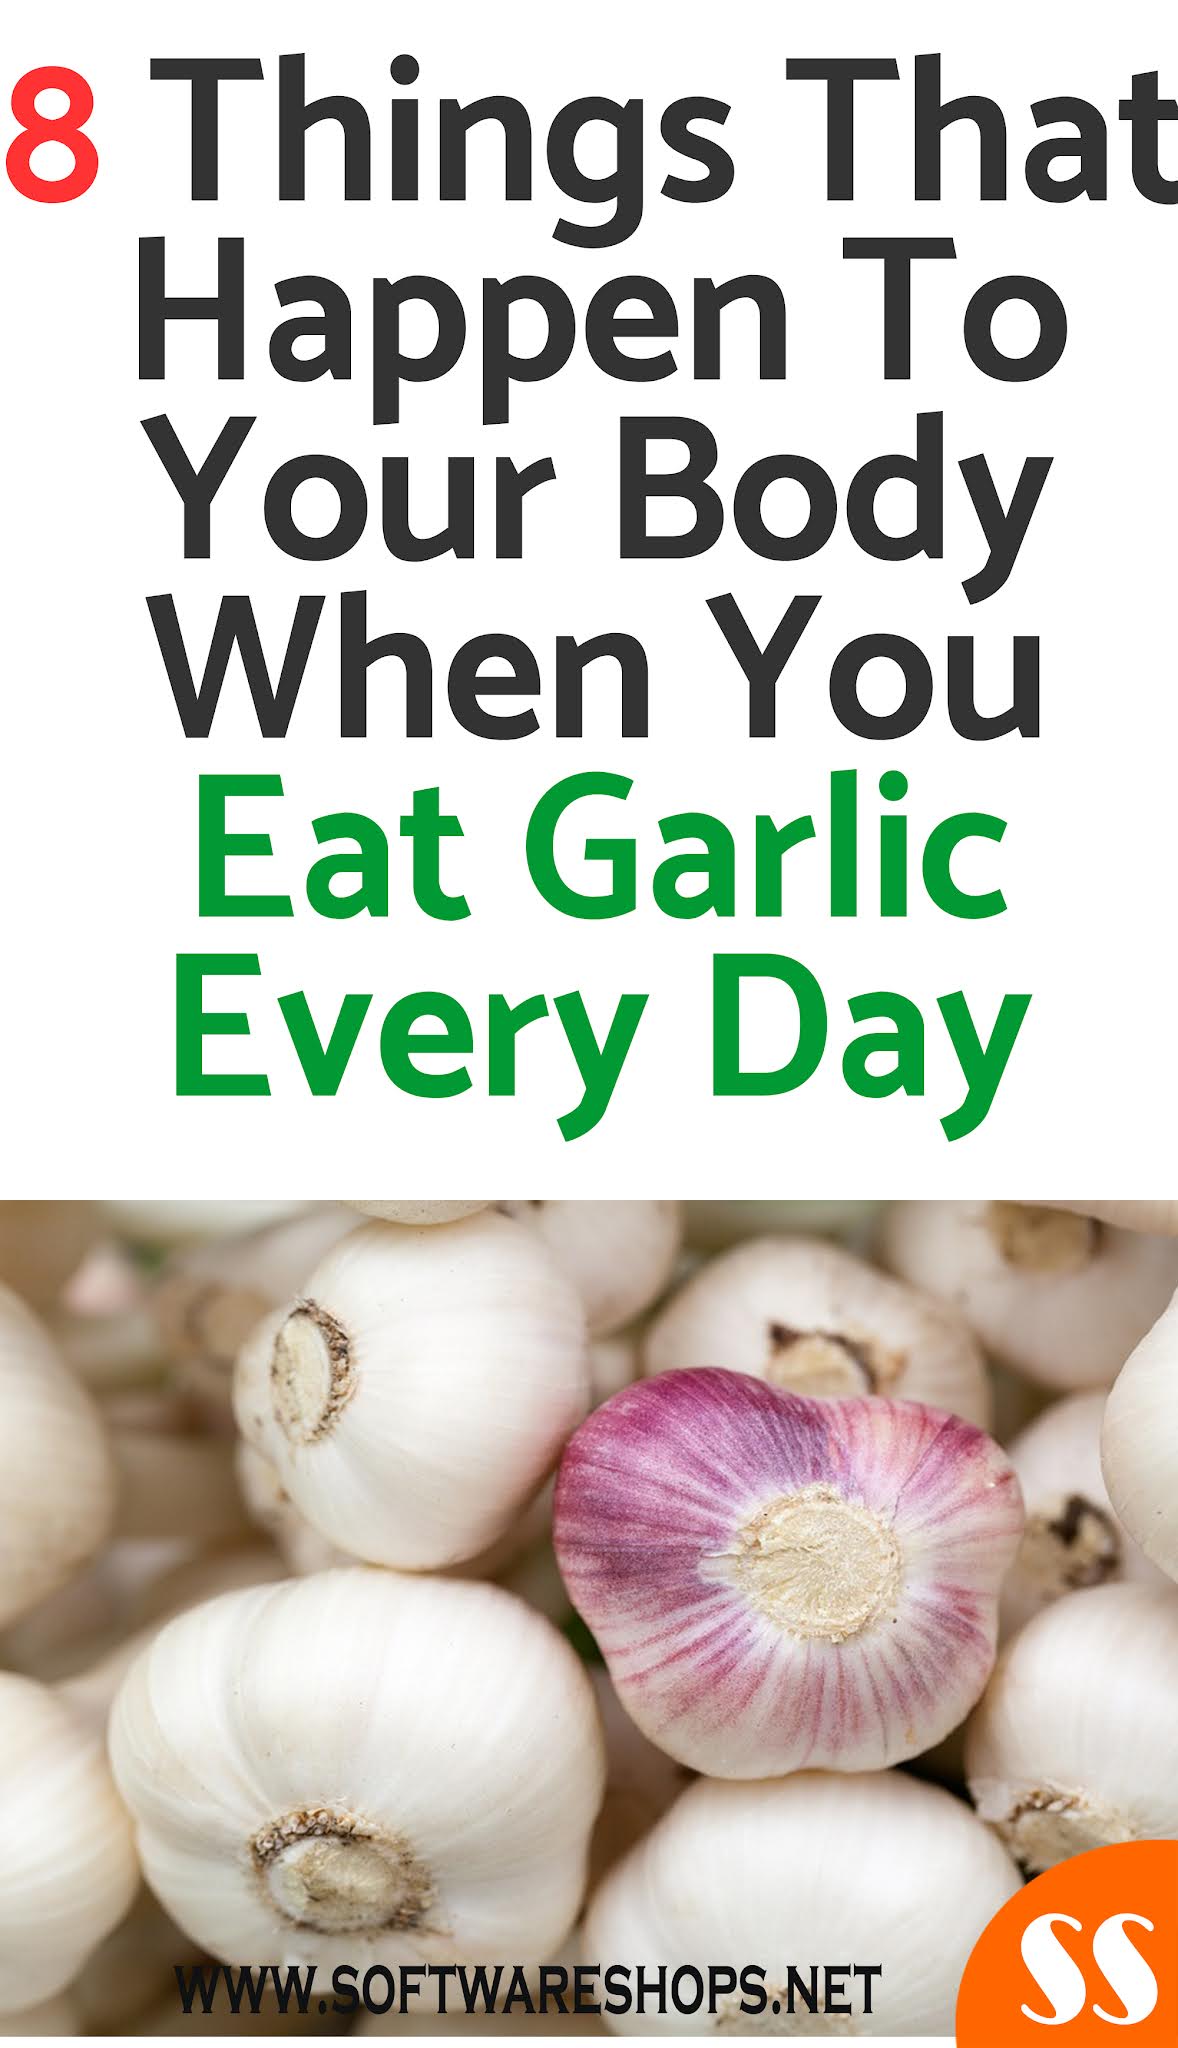 8 Things That Happen To Your Body When You Eat Garlic Every Day